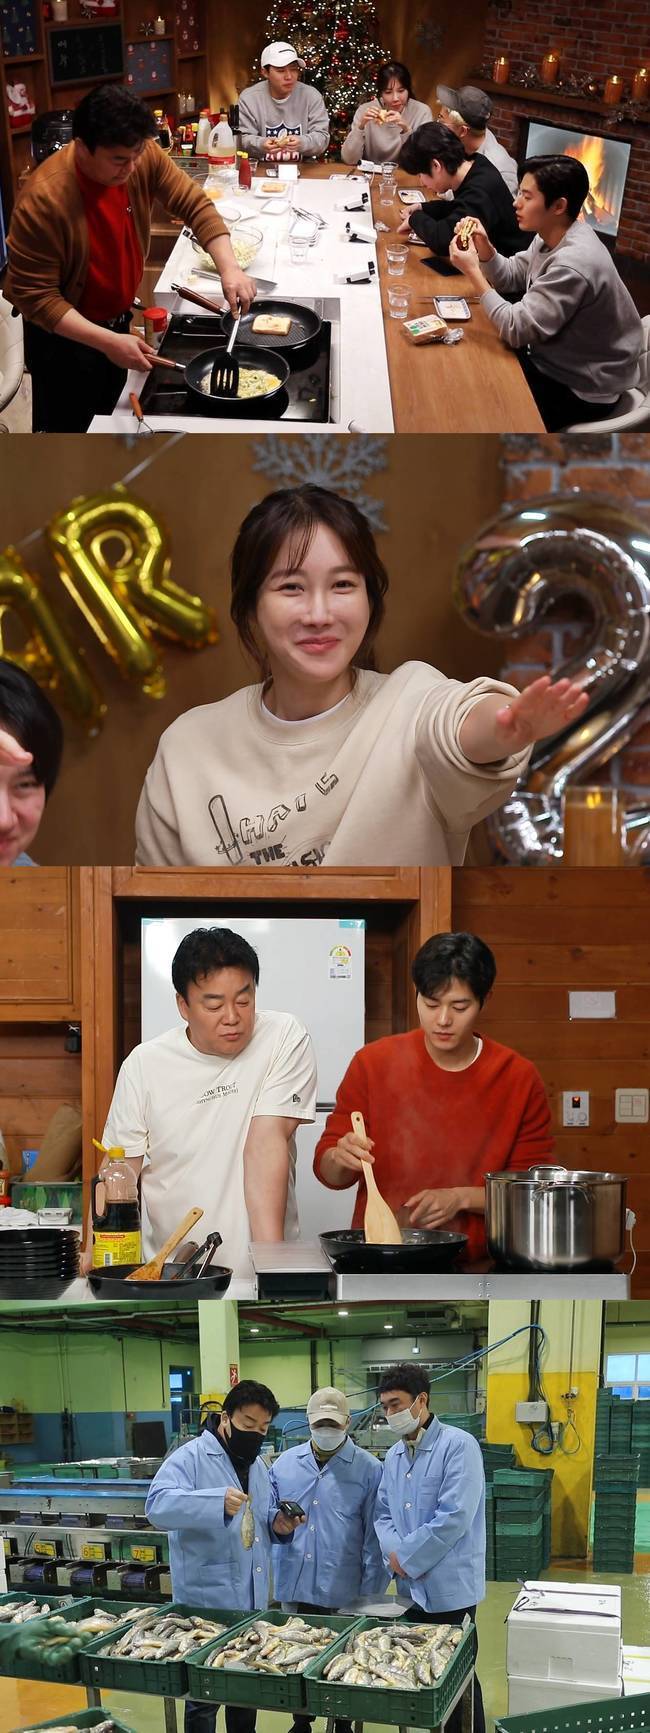 SBS Mattan Square will present a variety of Larimichthys polyactis recipes with Lee Ji-ah, the main character of SBS monthly drama Penthouse.On January 7, SBS Mattan Square shows Baek Jong-won, Yang Se-hyeong, Kim Hee-chul, Kim Dong-jun, Yoo Byung-jae and guest Lee Ji-ah starting to develop the recipe for Larimichthys polyactis on the second taste of Jeju Island.Prior to the full-scale Larimichthys polyactis recipe study, Baekya Restaurant added a warm atmosphere by making pork cabbage fried and road-street toast that can be easily made using cabbage.While we were having a good meal together, Kim Hee-chul asked Lee Ji-ah which of the Penthouse and Matnam Square was better, and Lee Ji-ah replied, I think the atmosphere here is better.When the members were surprised, Lee Ji-ah immediately explained that he had delicious food.In addition, if you actually have a son like a drama, you would like to be like any of the members. The question is that Yang Se-hyeong was chosen and surprised everyone because of his delicate and sincere personality.Baek Jong-won and Kim Dong-jun, who failed to guess the cooking team in the last cabbage homework showdown, prepared breakfast with penalties.The main menu was Chicken cabbage meat noodle noodle using dombegogi broth and cabbage noodles that were boiled the day before.In addition, the team made a short-lived fried rice with sesame oil that is well suited to ramen noodles, and completed the prize quickly. Despite the morning, the members had a meal that tasted different ramen noodles.The members commented, Even if you dont put sugar in it, you can feel the sweetness of cabbage in the soup. The recipe for Chicken cabbage noodle noodles, which captures the taste of the members at once, can be found on the air.On the other hand, the second taste of Jeju Island is Larimichthys polyactis, which is suffering from sluggish consumption despite the fact that it is deeply perceived as expensive.Larimichthys polyactis has a total of eight sizes, ranging from 75 large sizes to 210 small and cheap.In particular, 210 rice, which accounts for one-third of the total production of Larimichthys polyactis, is said to have fallen sharply in food and restaurants, which were the main market due to Corona 19.Upon hearing this news, Baek Jong-won and Yang Se-hyeong found the Larimichthys polyactis tablets in Jeju Island.As of December 2019, employees complained that while the stock of the refrigerated warehouse in the Jeju Island waterfront was about 4,400 tons, it had already accumulated 5,600 tons by November 2020.In the situation where the main market is blocked, the last hope is home consumption, but consumption is not done because of the perception that it is troublesome to eat at home.Baek Jong-won suggested that Larimichys polyactis be used as a side dish for convenience store lunch so that it can be easily accessed anywhere.